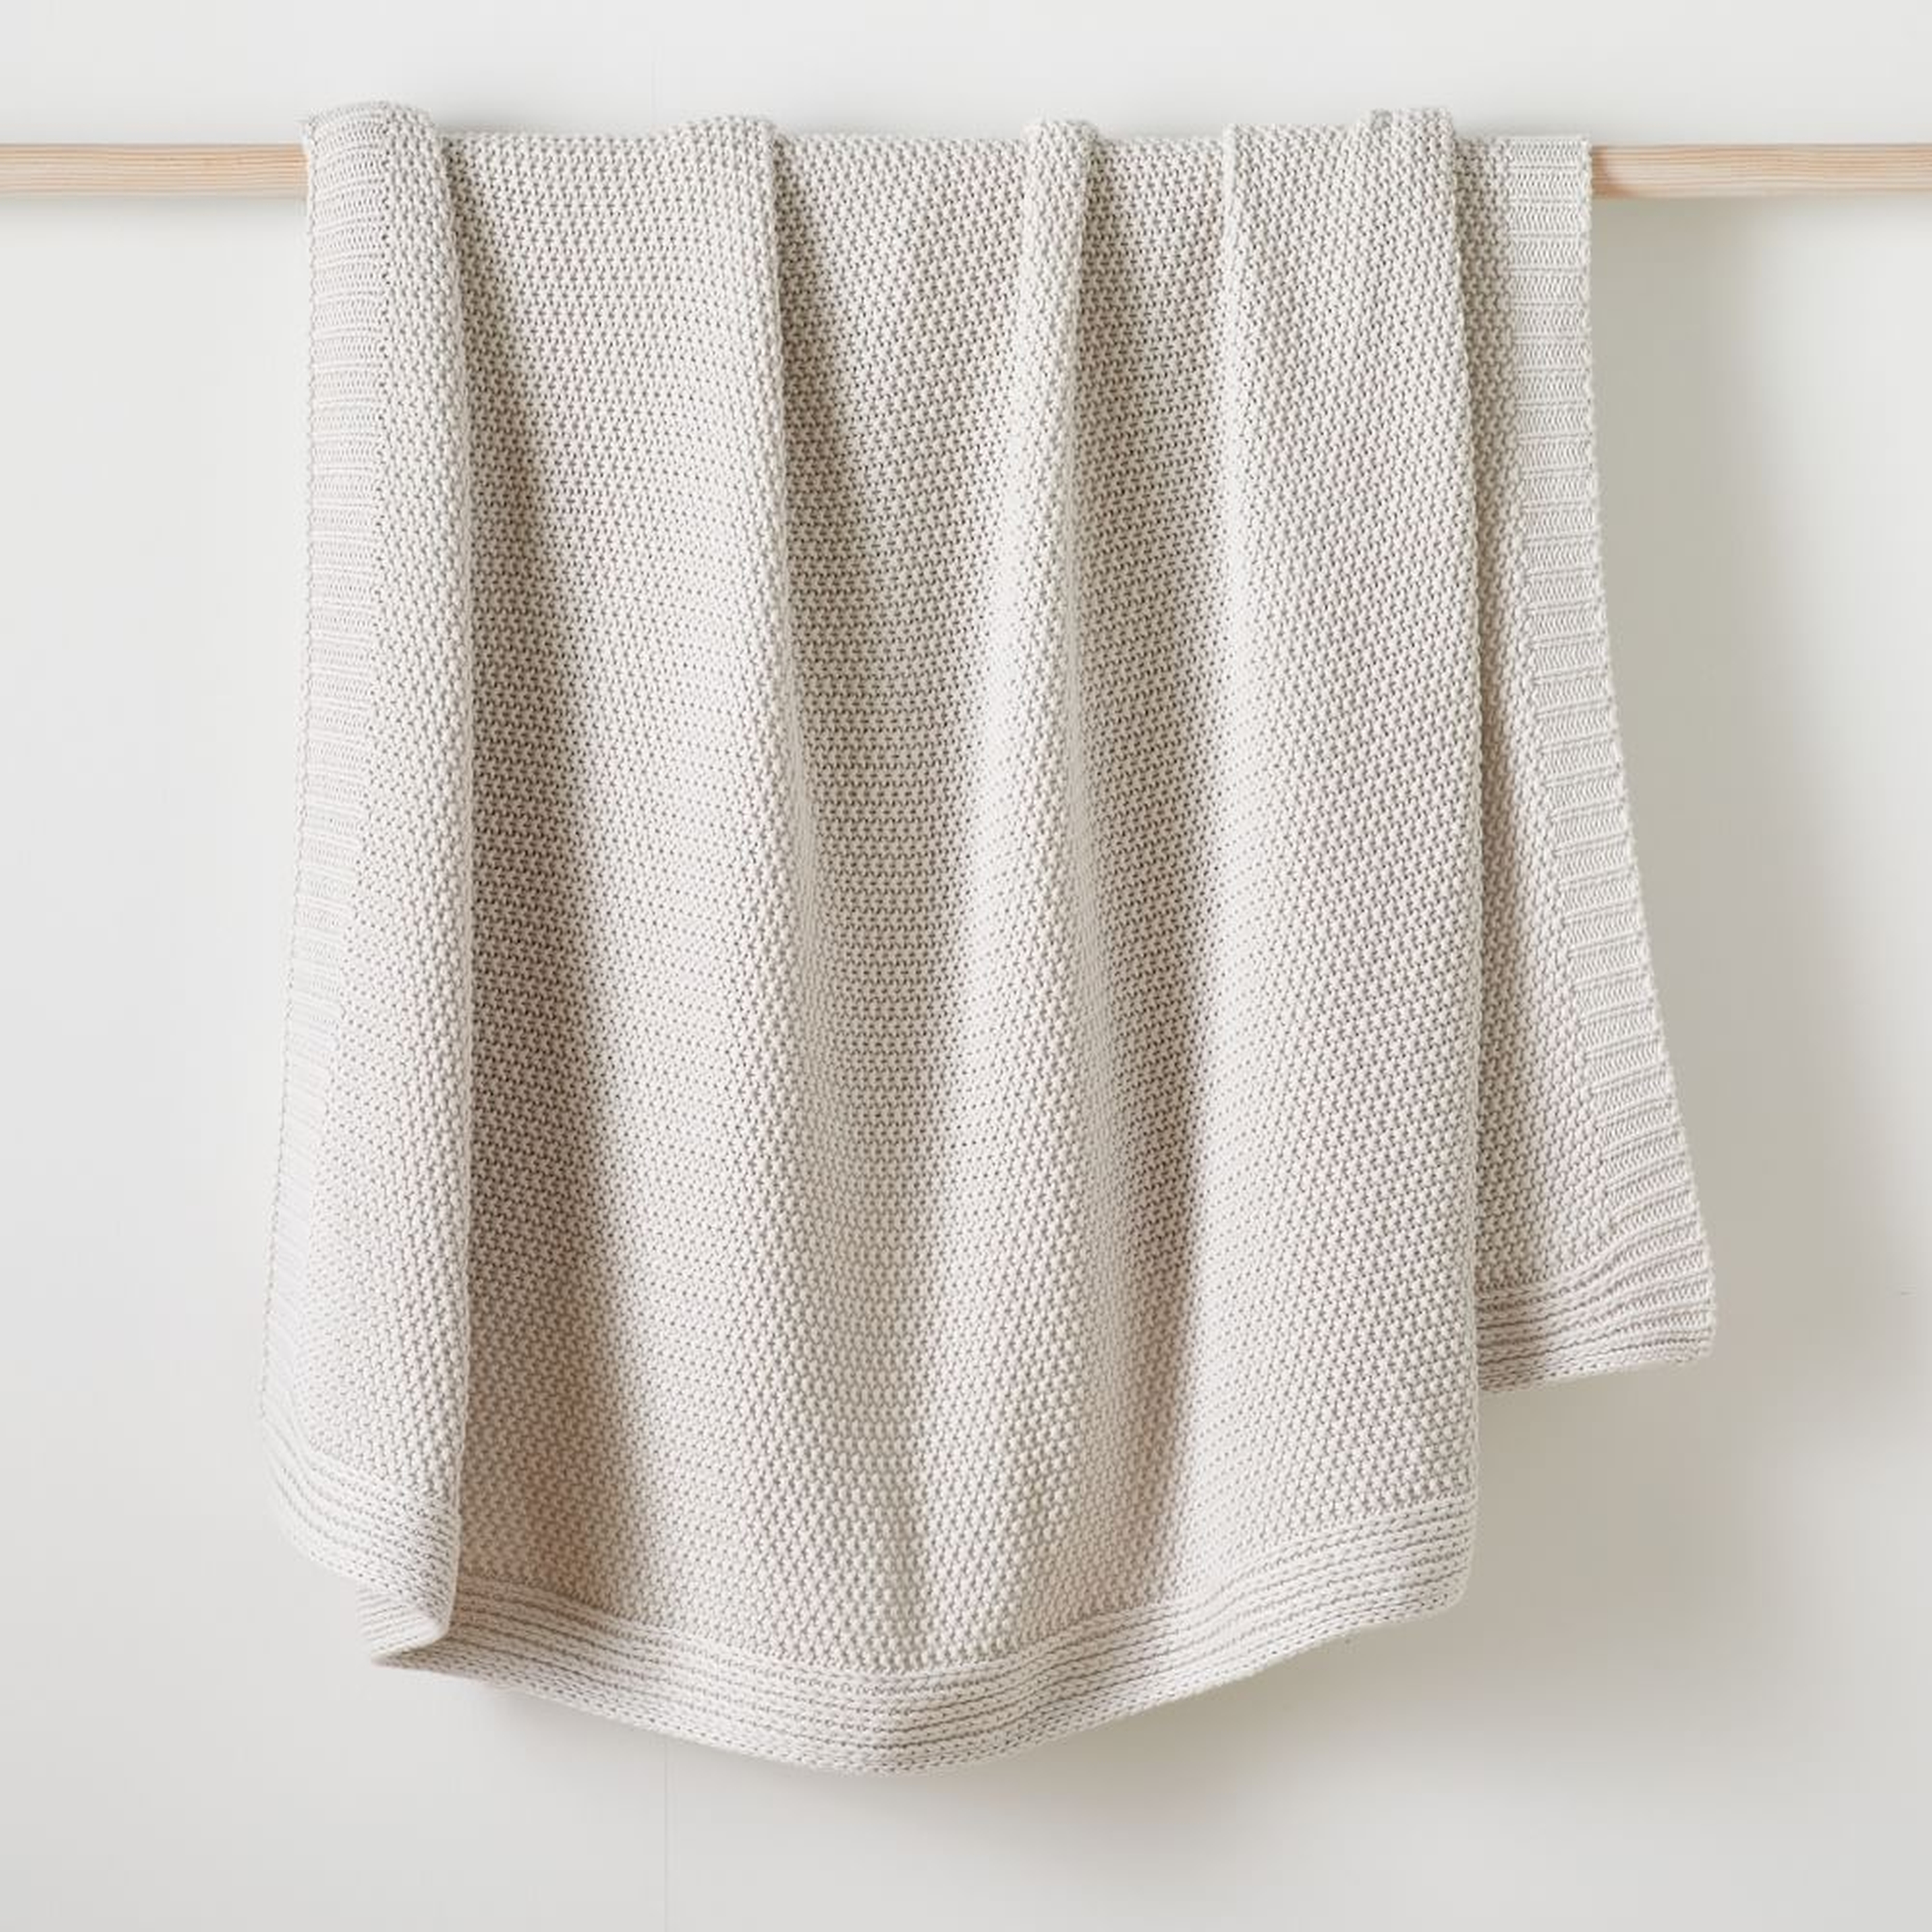 Cotton Knit Throw, Frost Gray, 50"x60" - West Elm